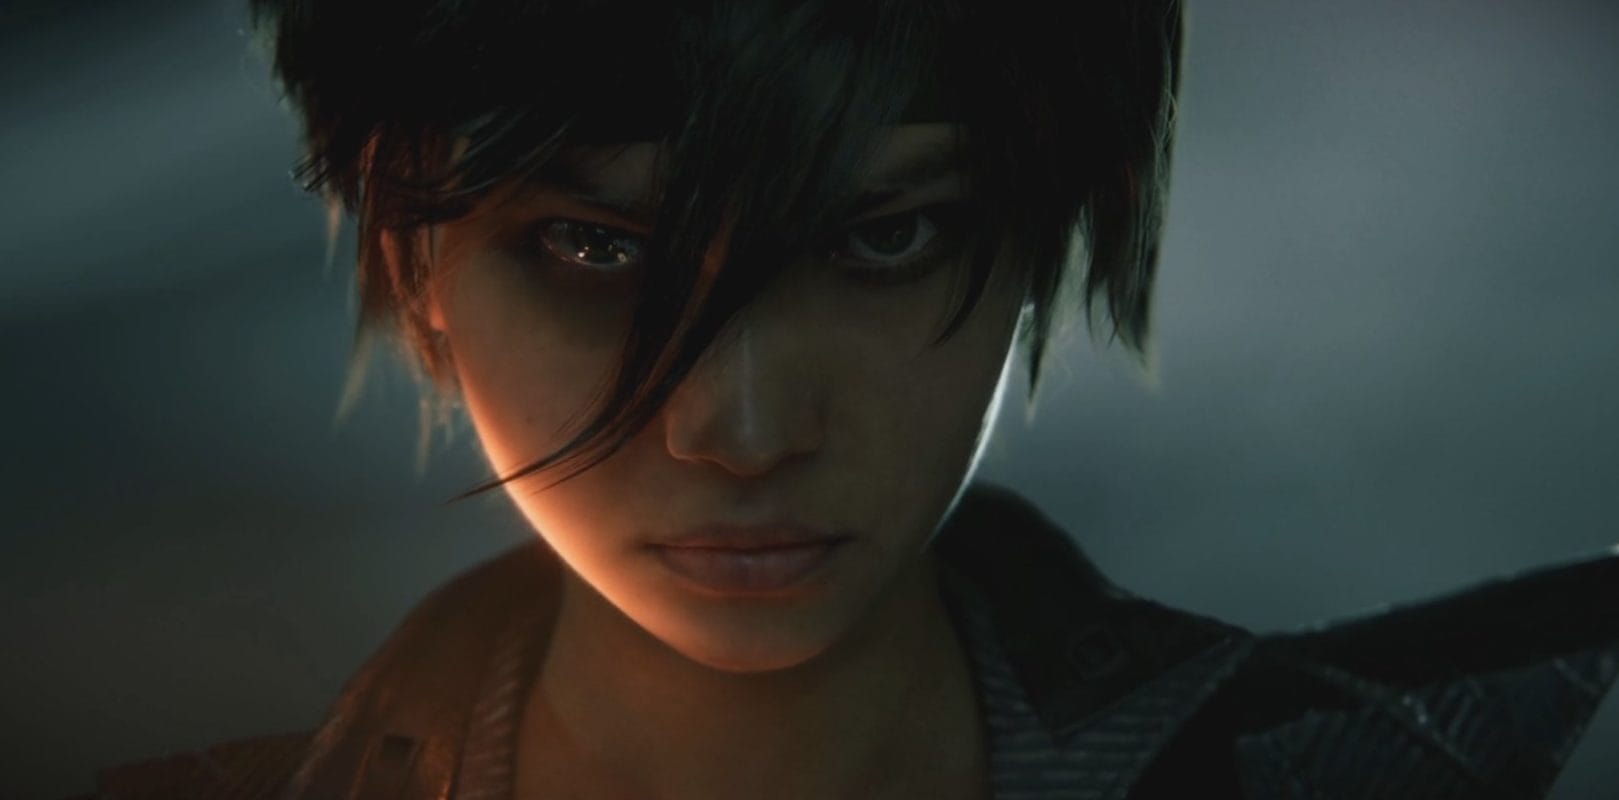 Ubisoft confirms to fans that Beyond Good and Evil 2 is still in development